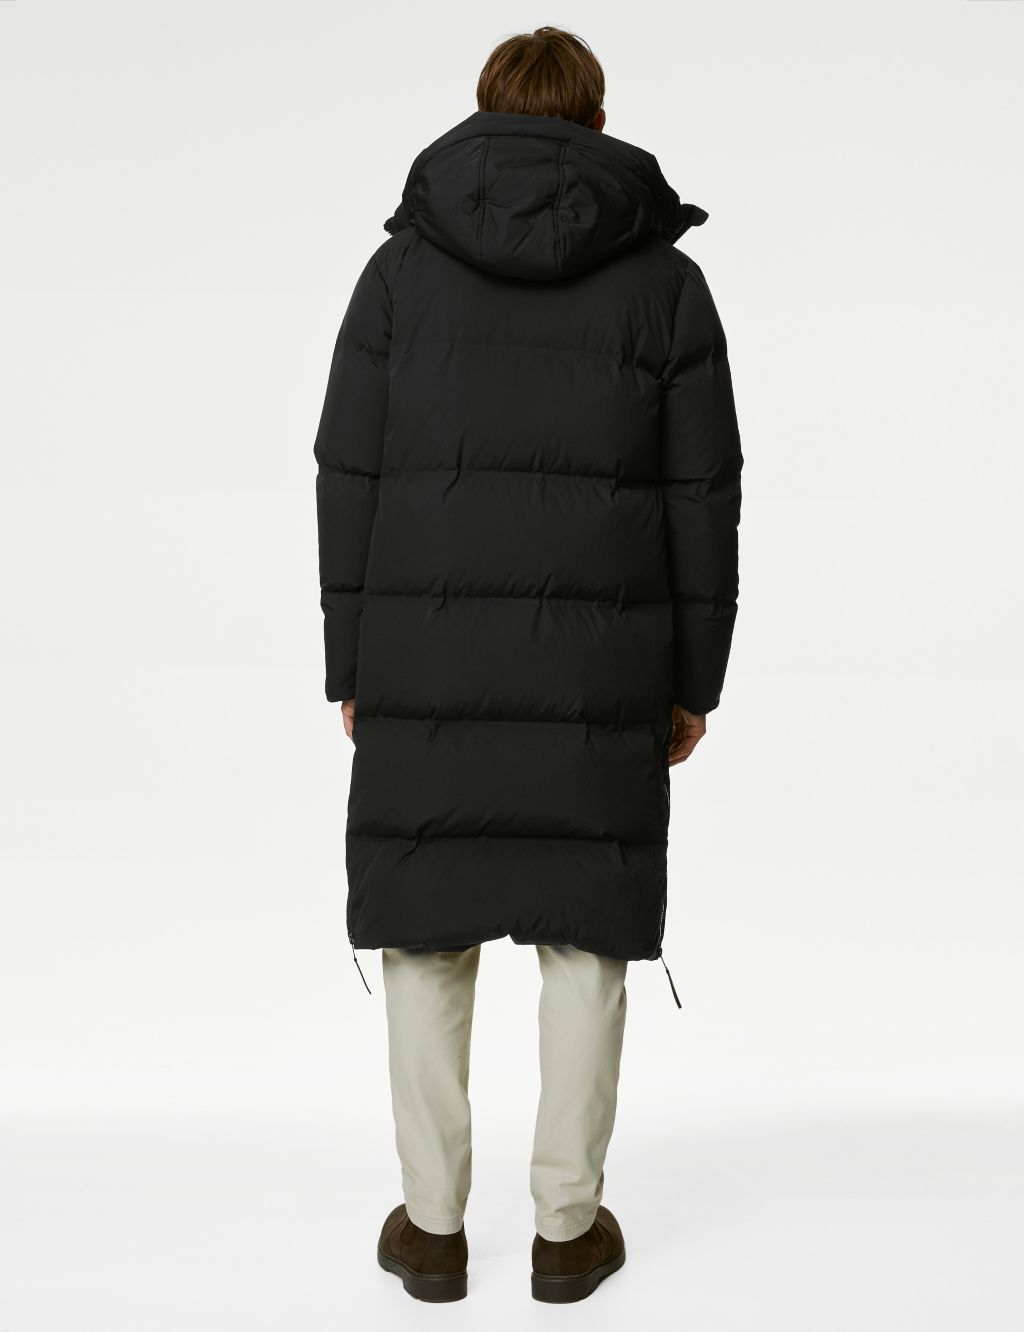 Feather and Down Puffer Jacket with Stormwear™ image 5